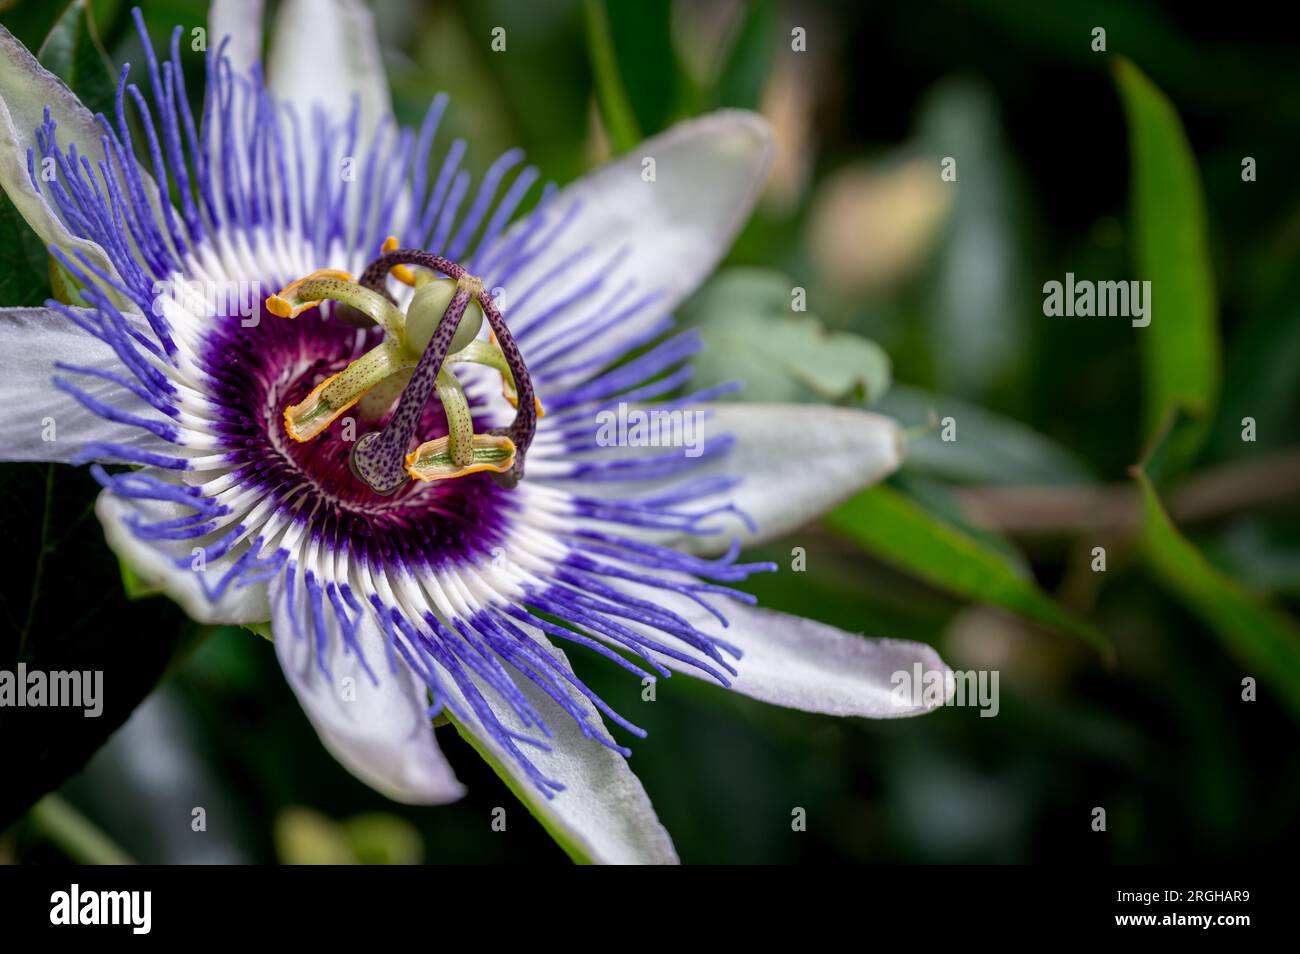 Close-up of passion flower. Passiflora caerulea blooming. Blue passionflower. Bluecrown passionflower. One common passion flower. Stock Photo